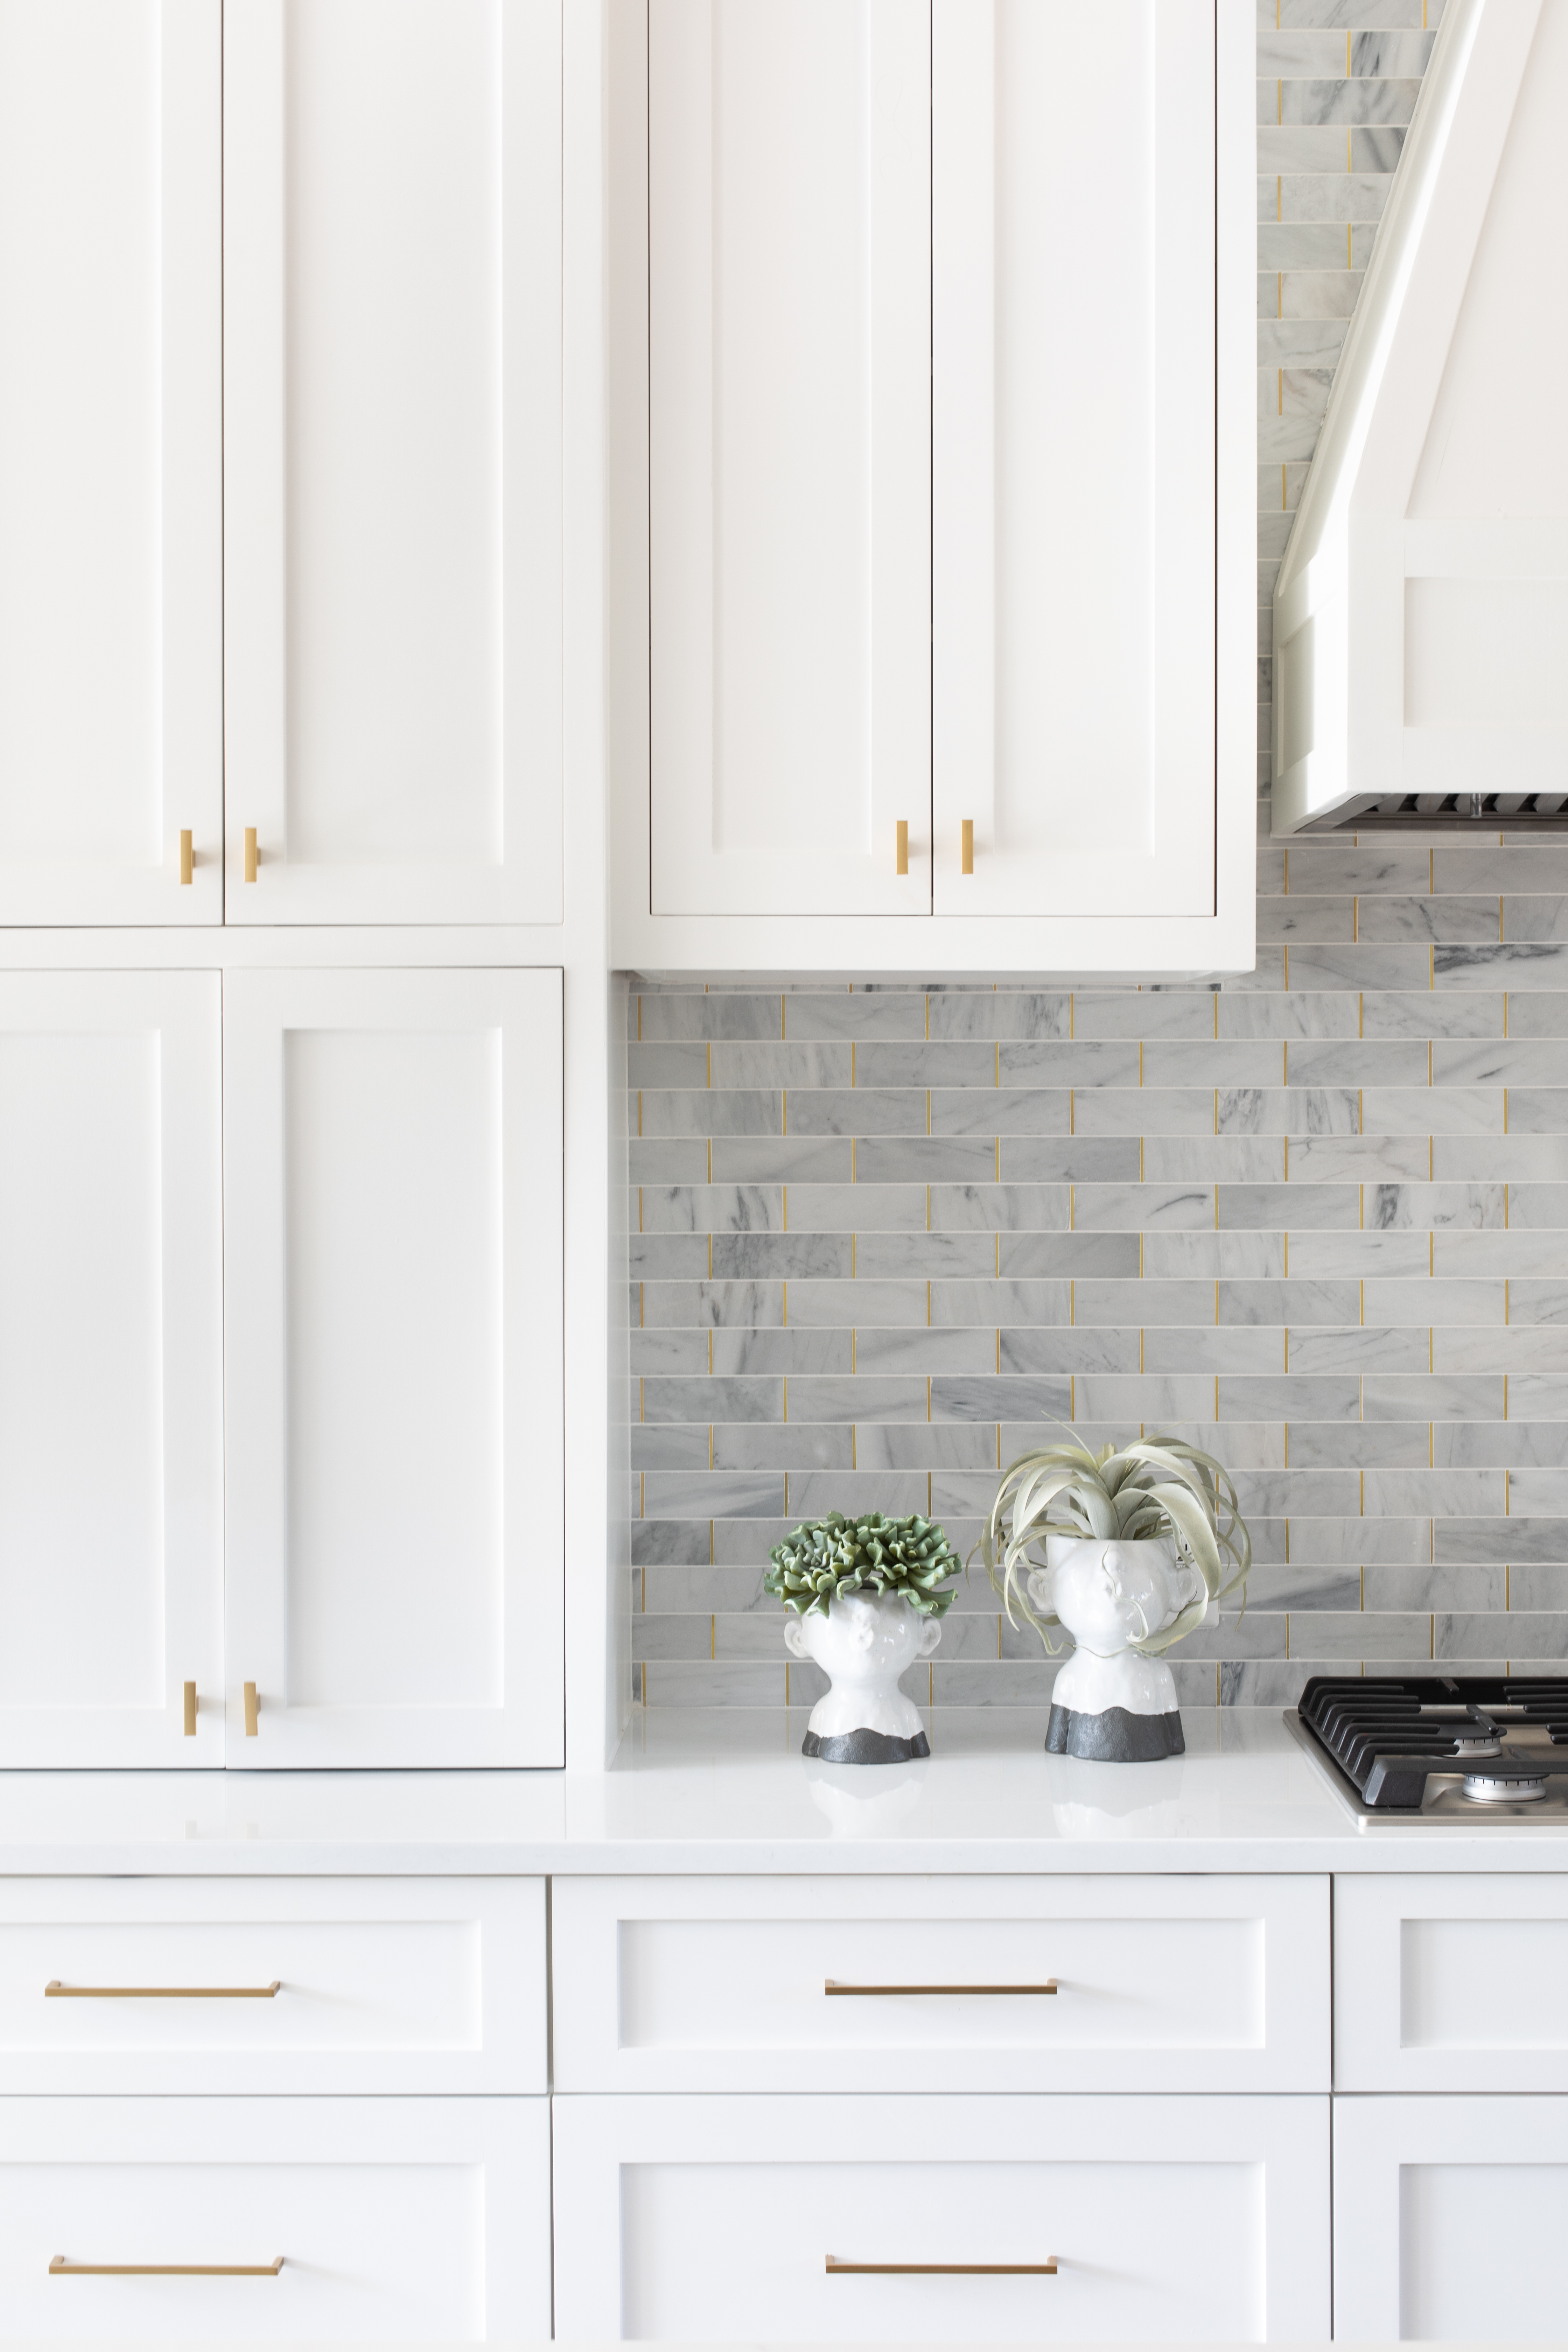 A white kitchen with white cabinets, gold pull bar handles, and grey subway tiles